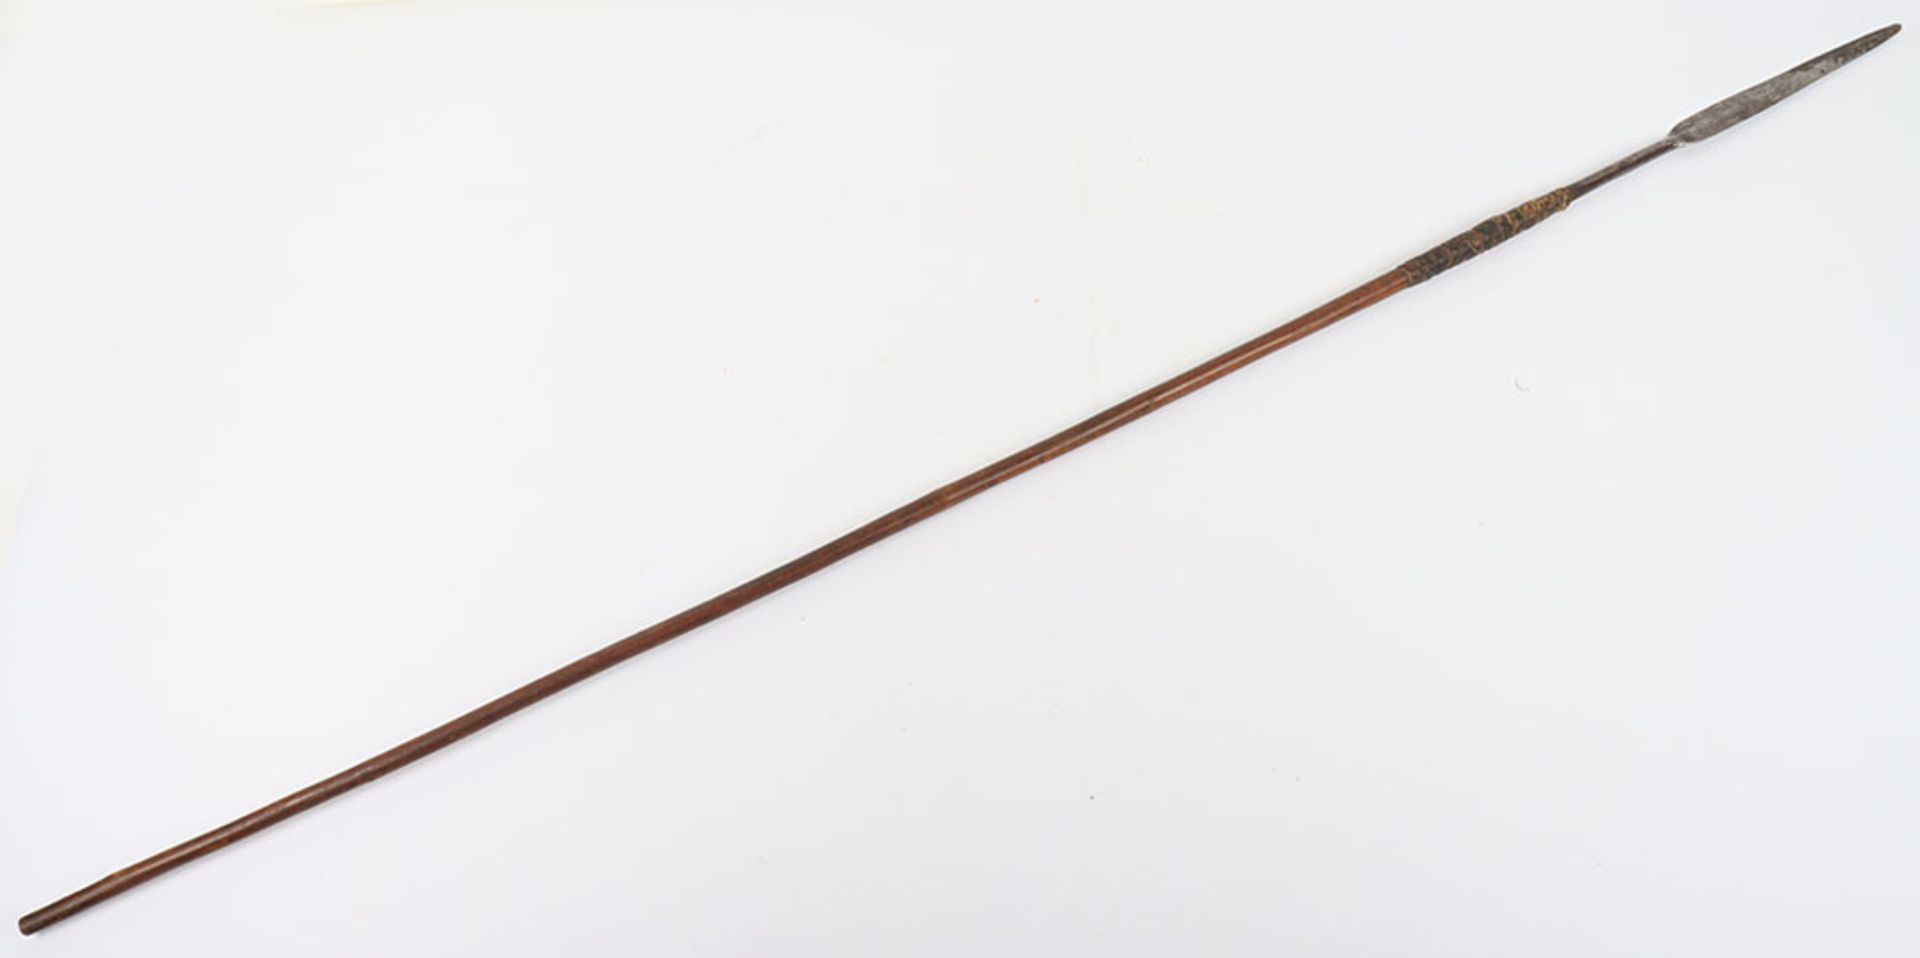 South African / Zulu Throwing Spear - Image 6 of 6